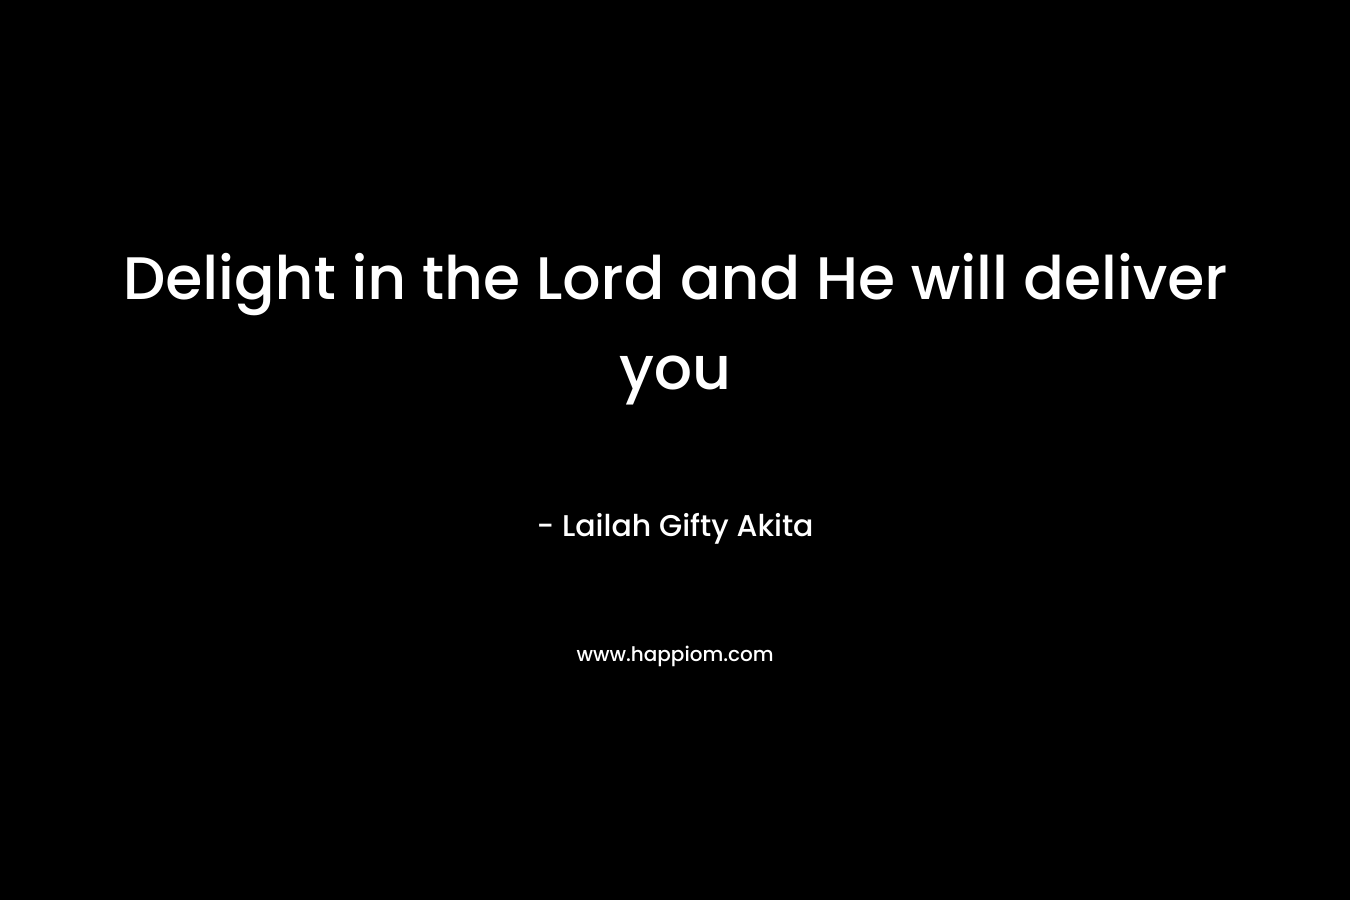 Delight in the Lord and He will deliver you